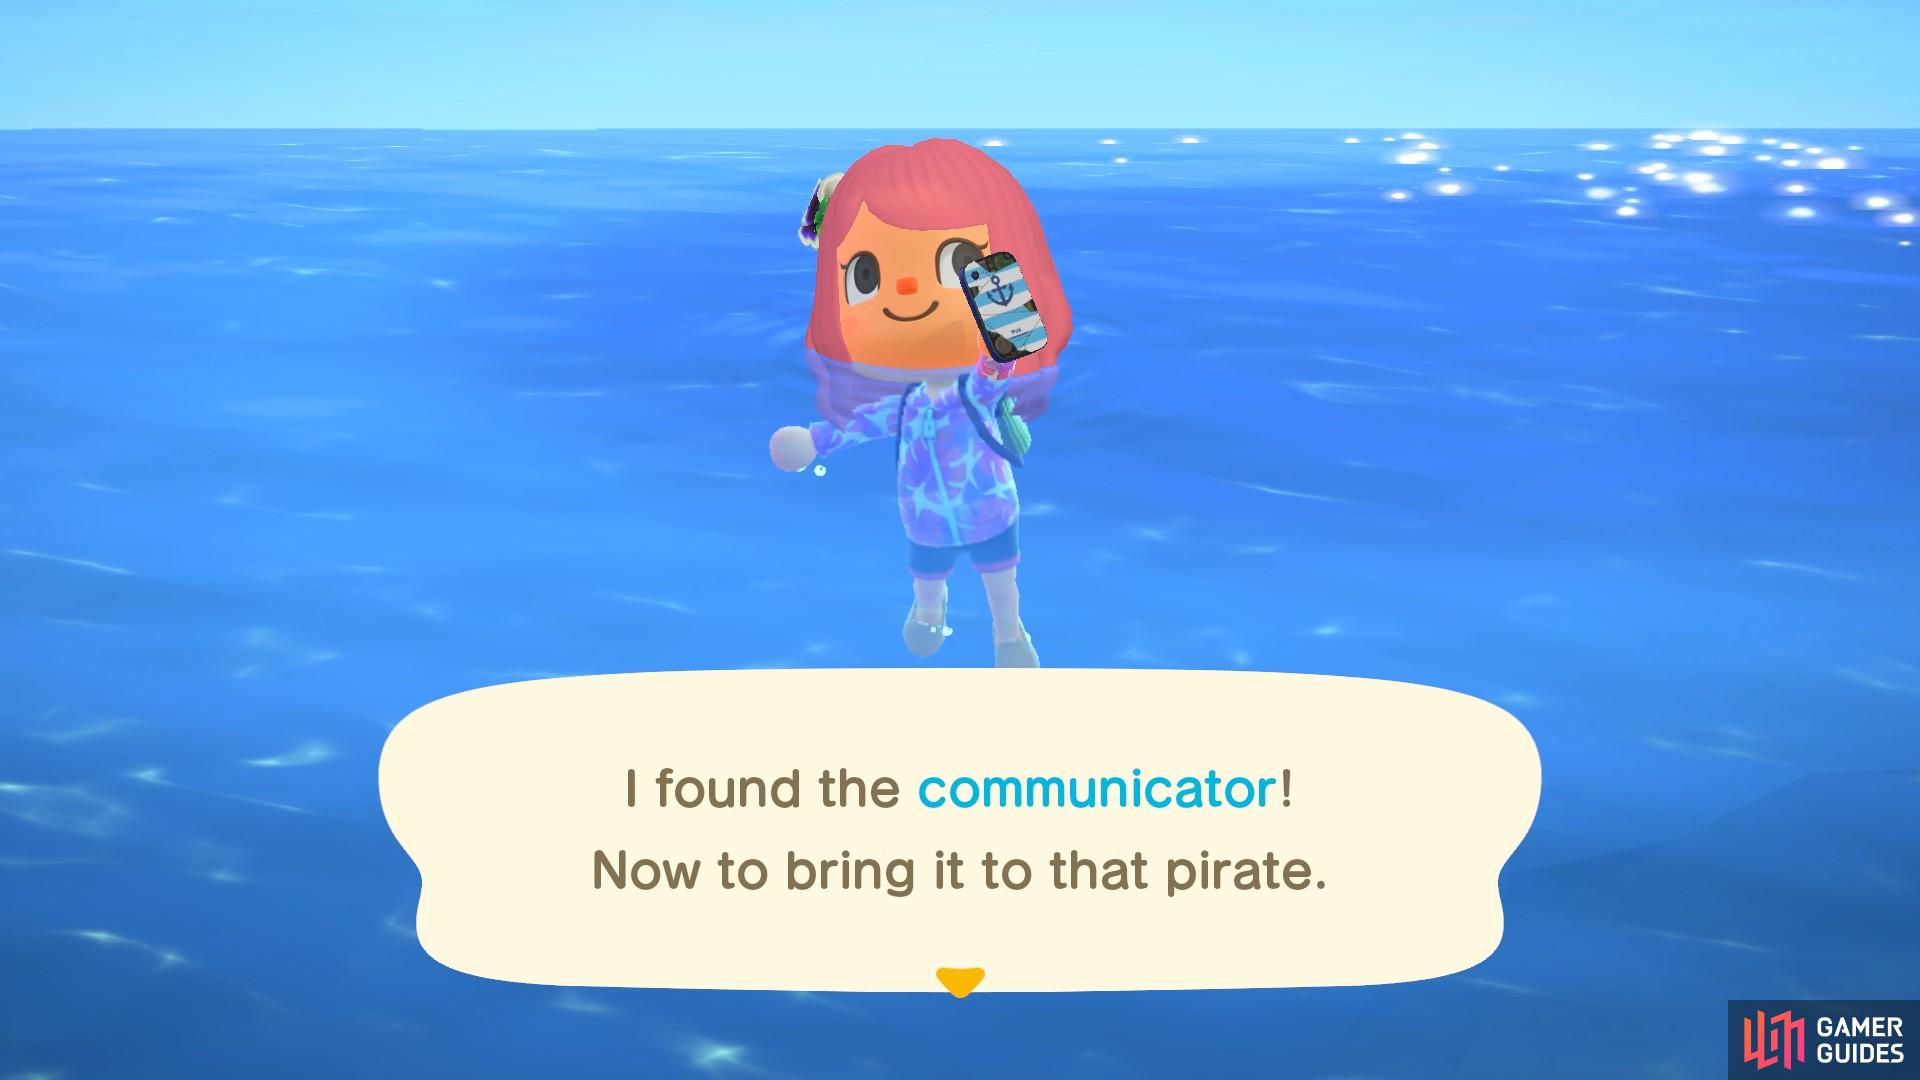 If Gullivarrr is about you might find a communicator instead of sea creatures!